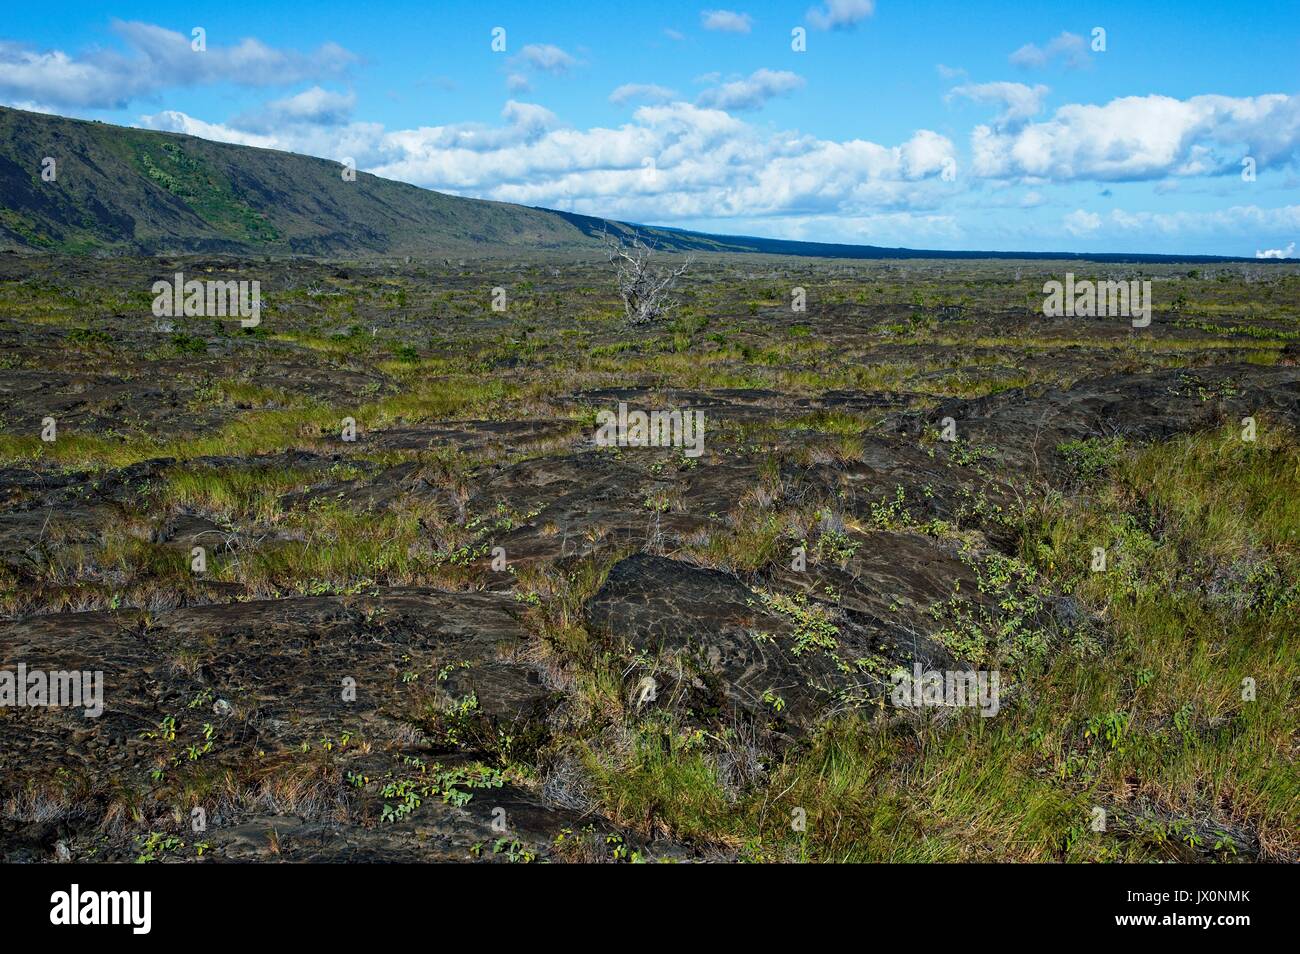 Scenery along the Chain of Craters Road in Volcanoes national park Stock Photo